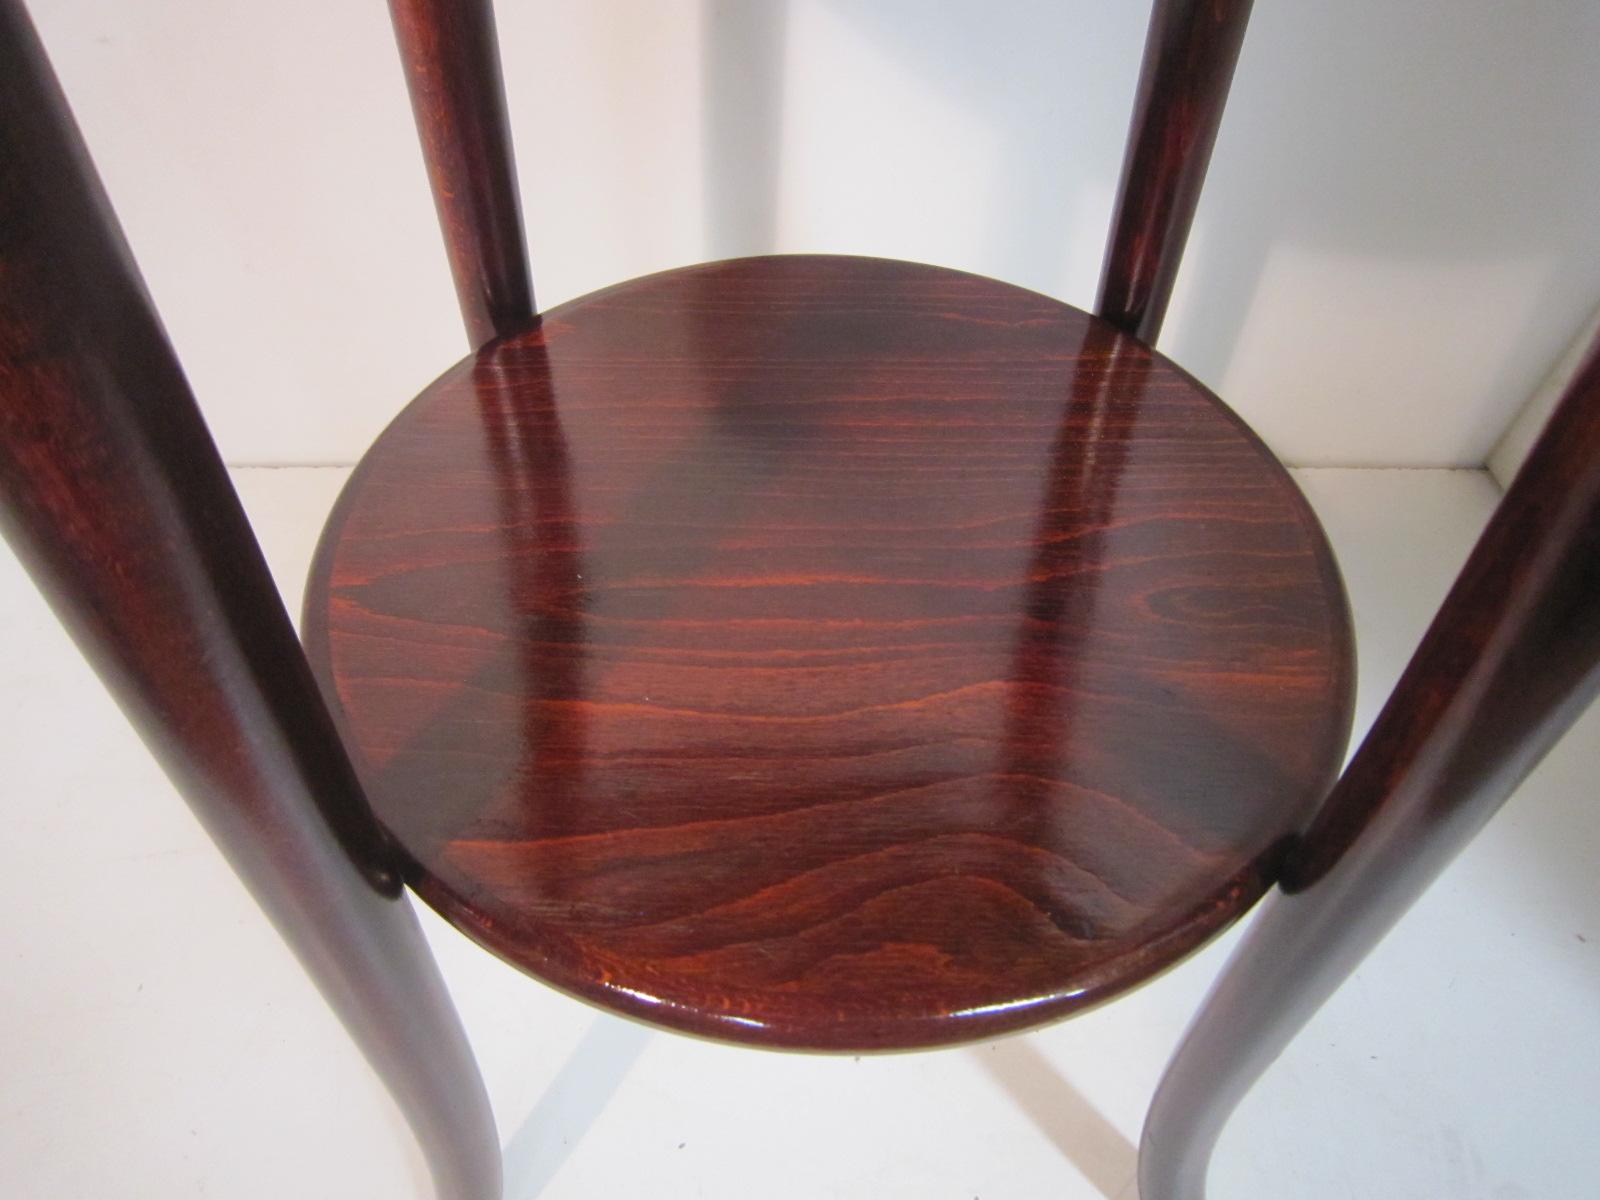 Original Austrian Small Round Bentwood Jungenstil Side Table with Oxblood Finish 4